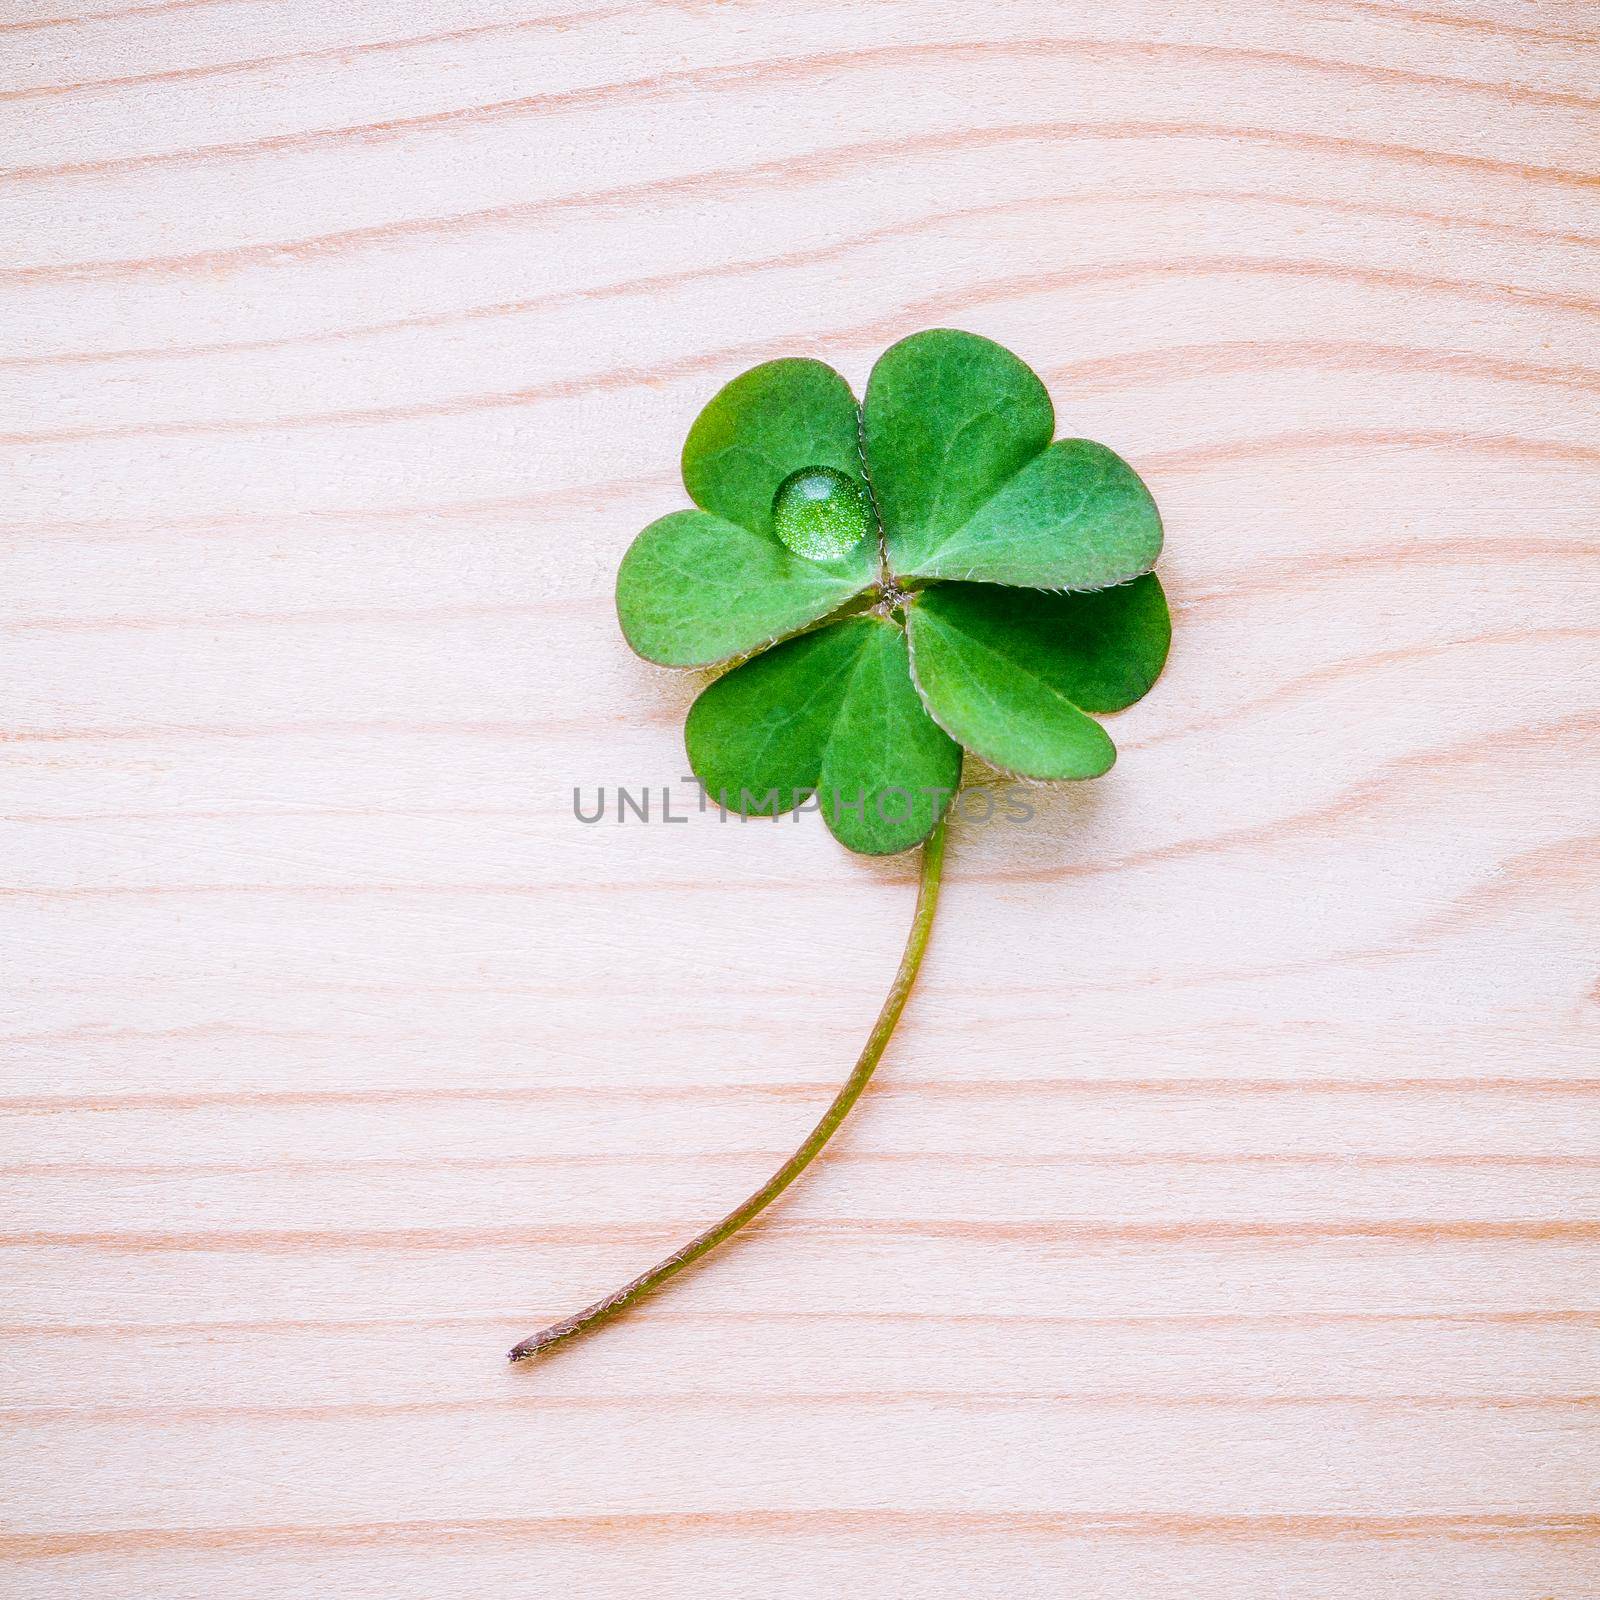 Clover leaves on shabby wooden background. The symbolic of Four Leaf Clover the first is for faith, the second is for hope, the third is for love, and the fourth is for luck.